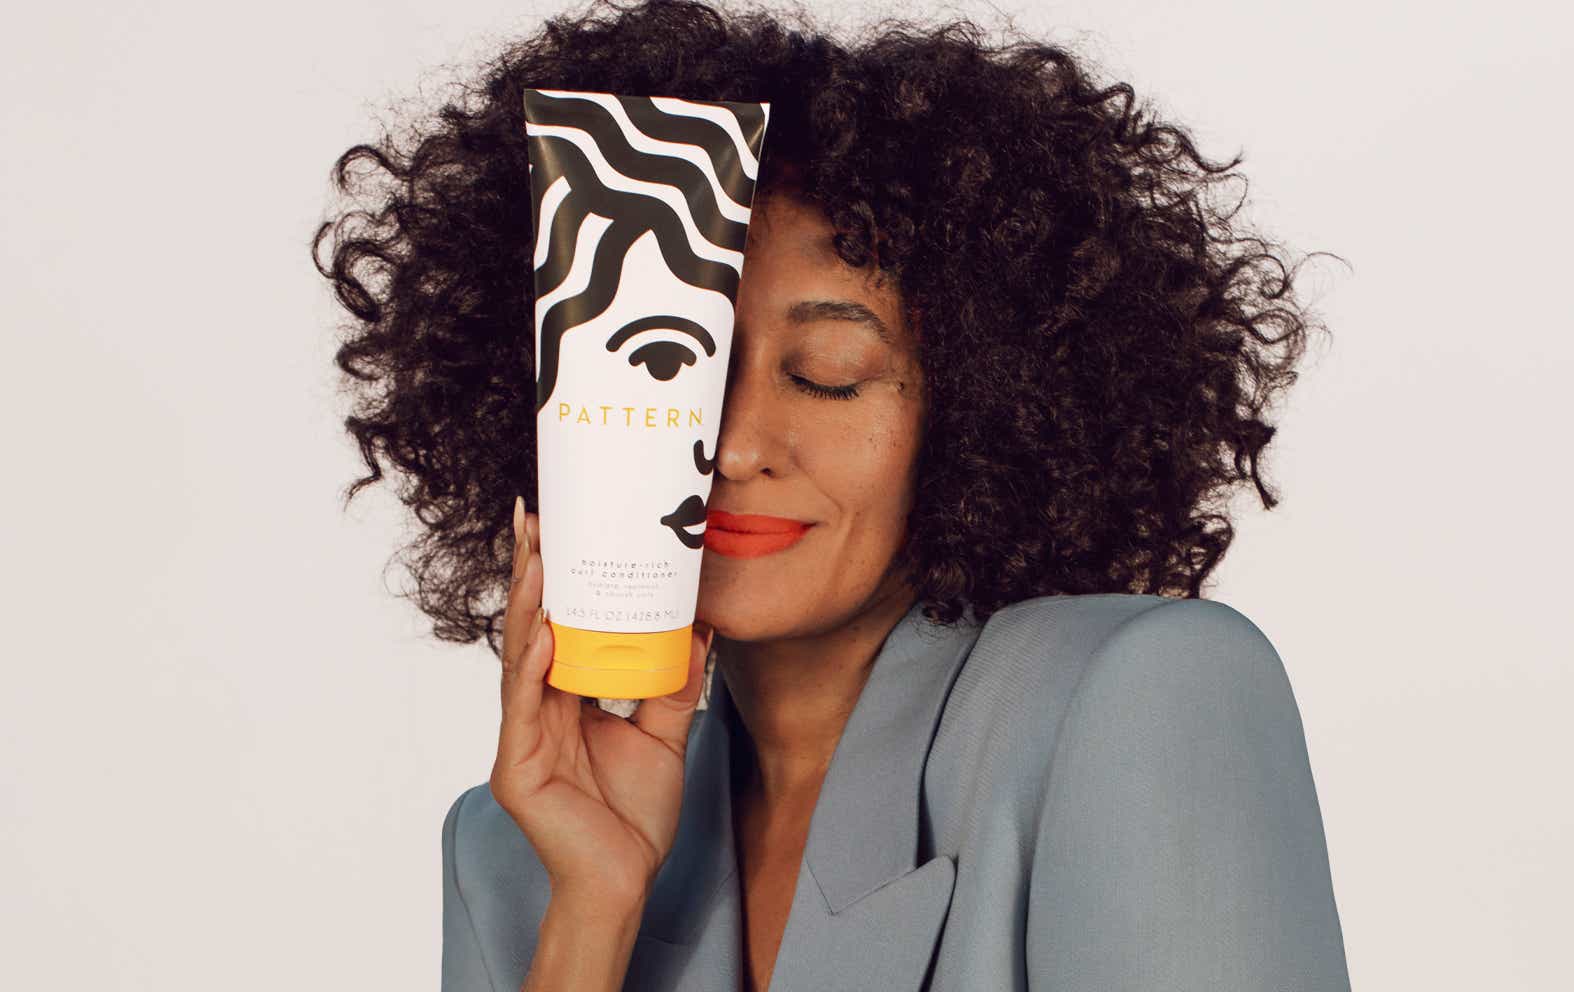 Tracee Ellis Ross holding Pattern Beauty product